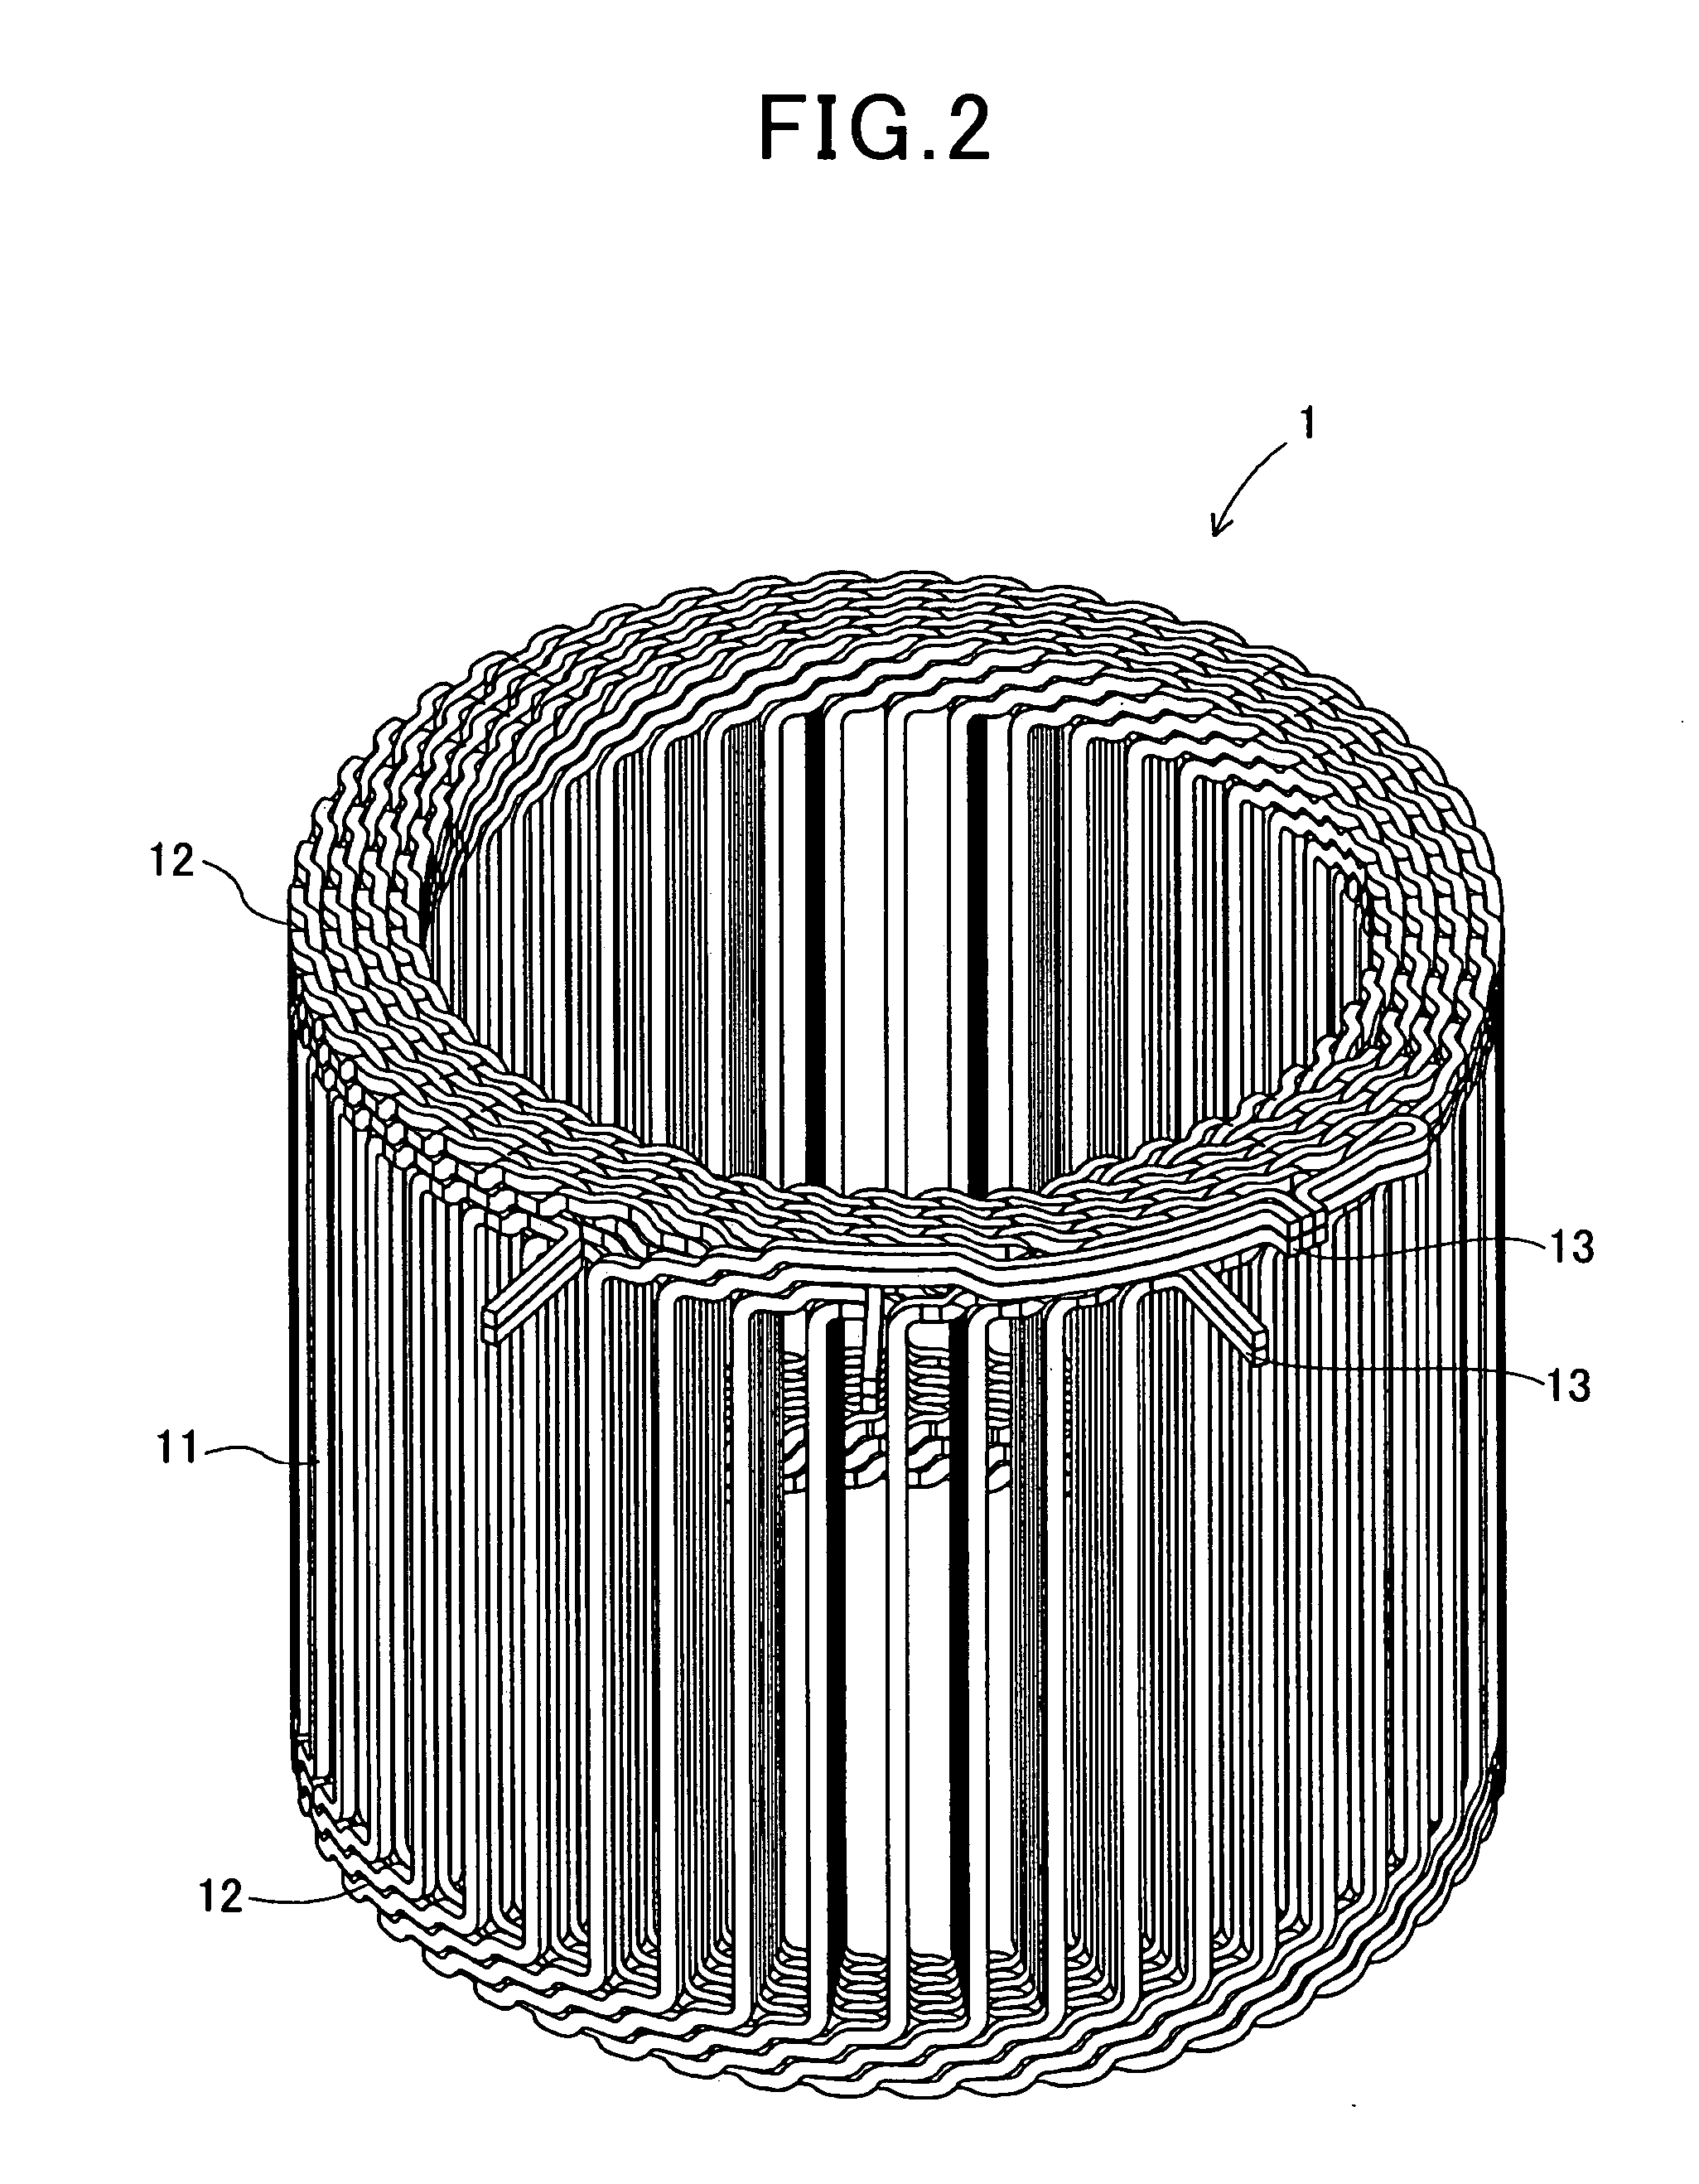 Segment-core type stator for inner-rotor type rotary electric machines and an improved method for manufacturing the stator